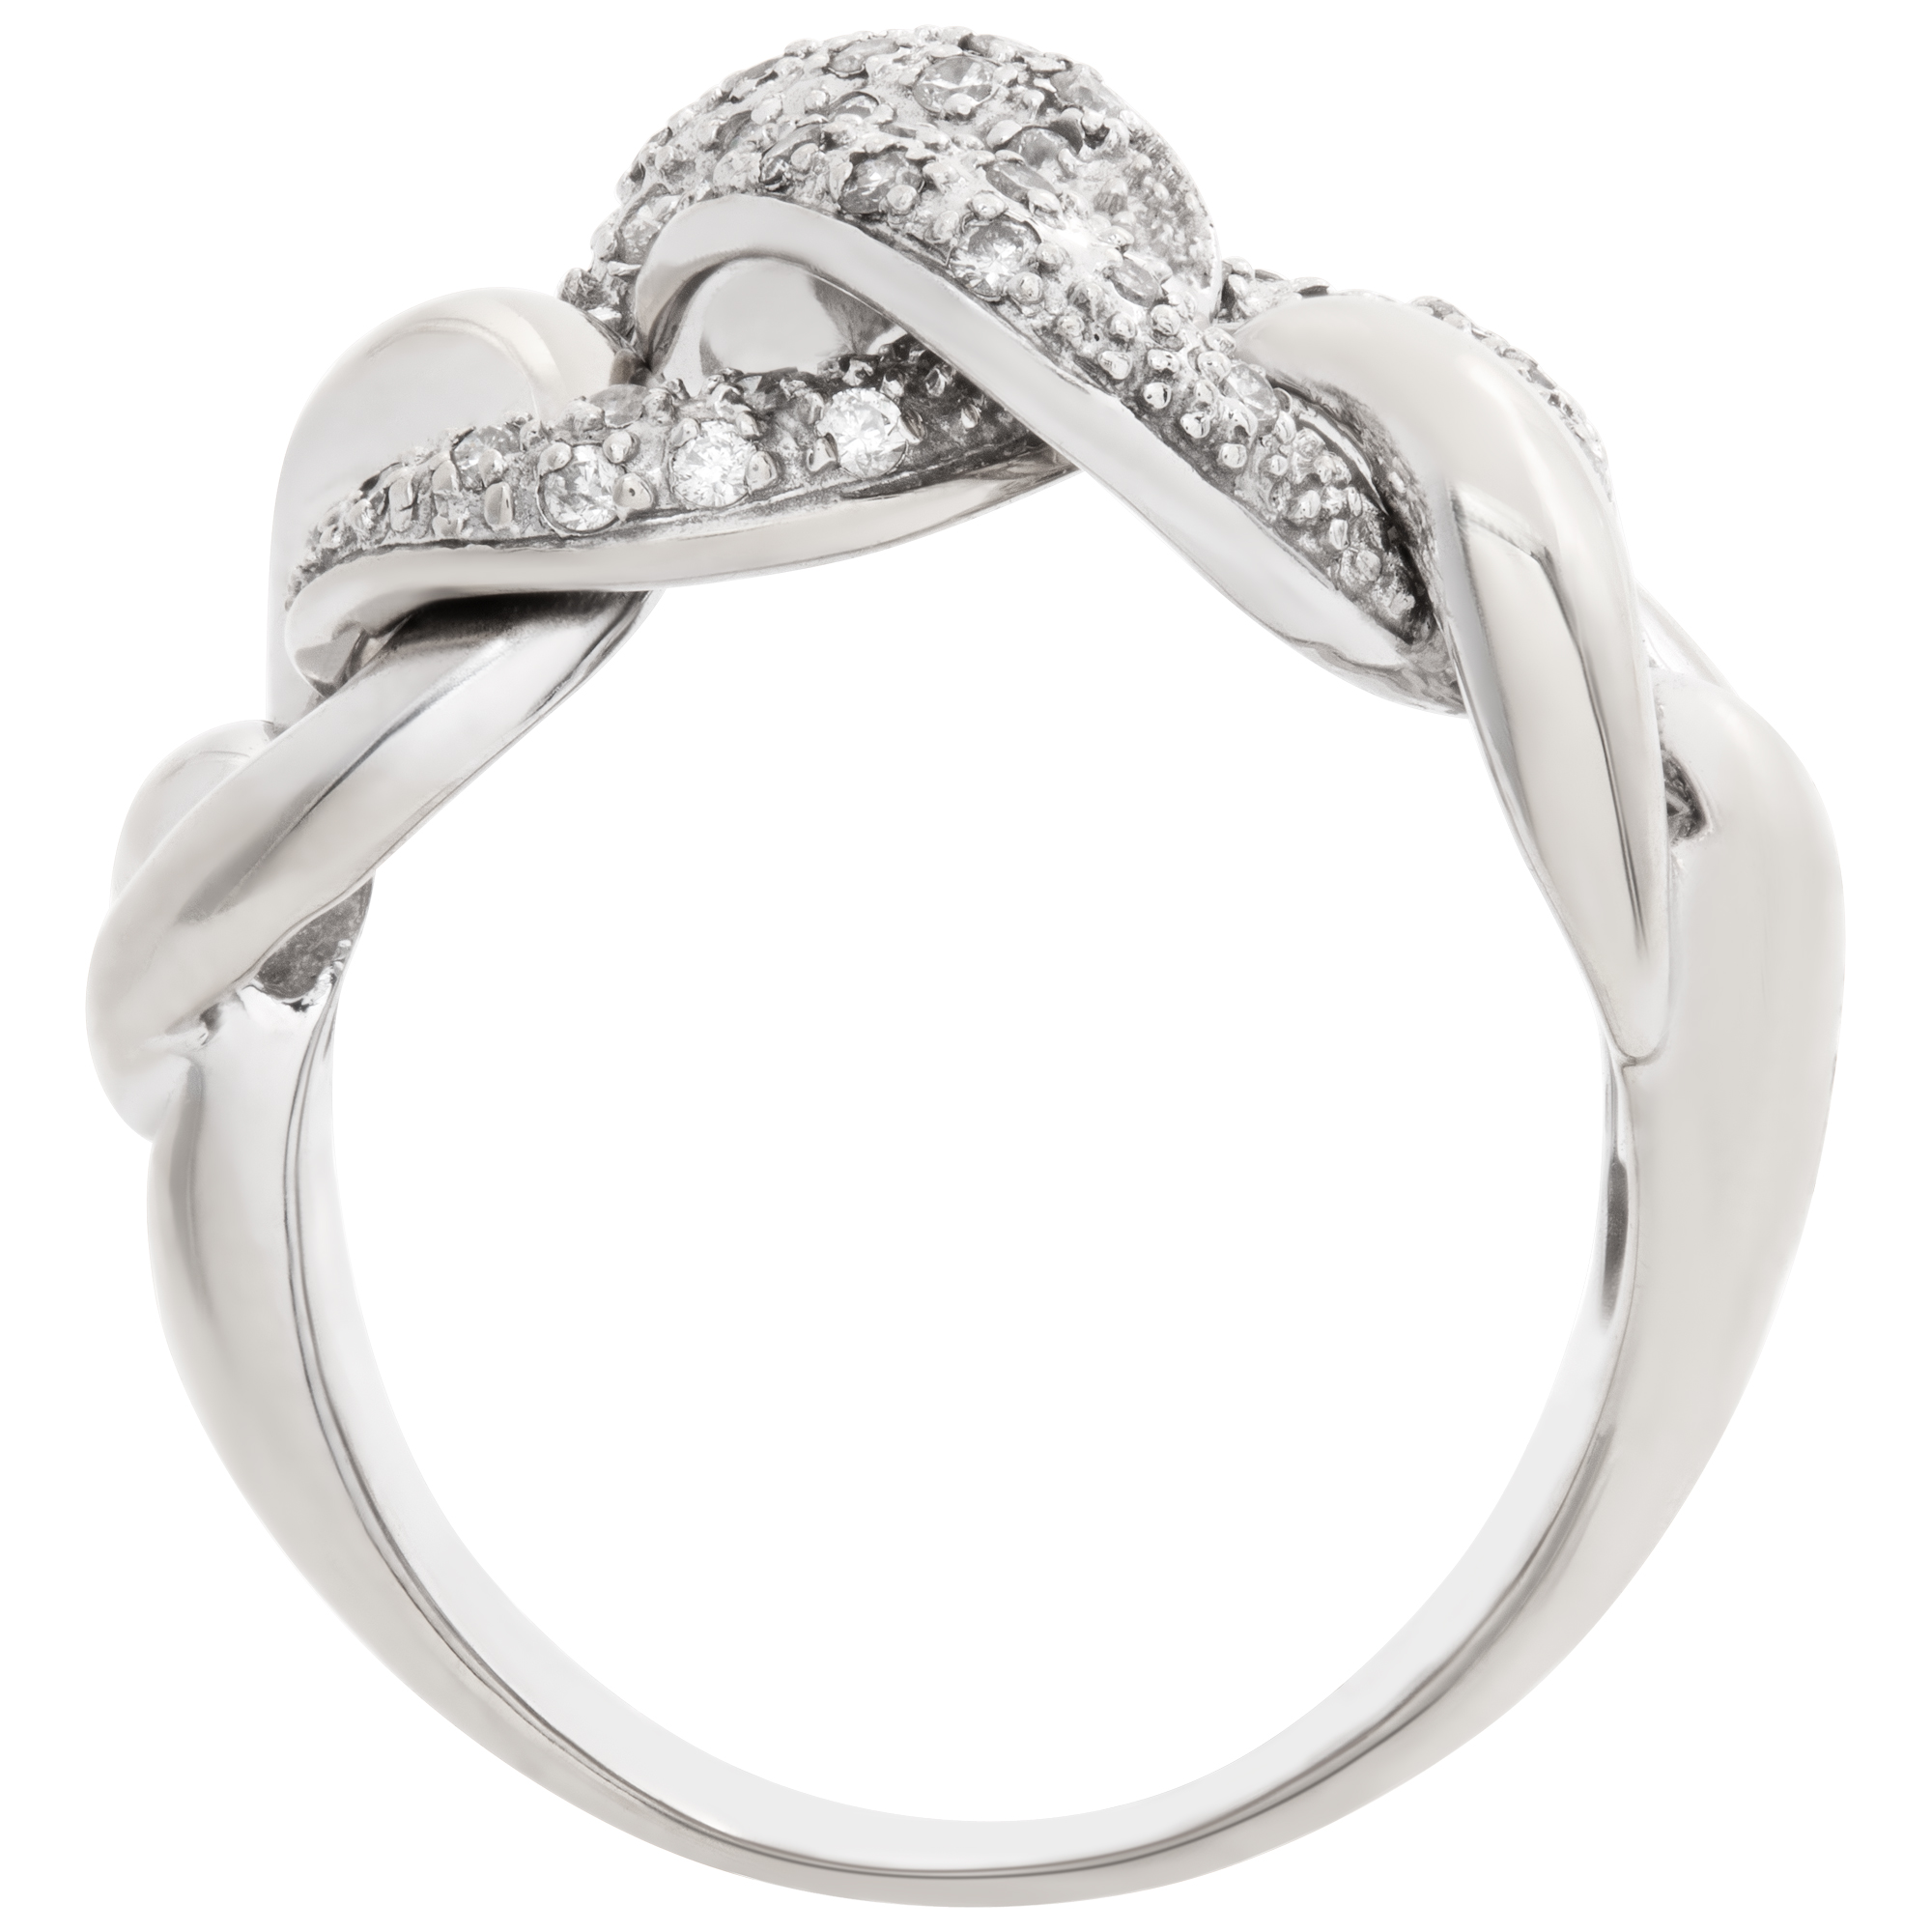 Pave Diamond link ring in 14k white gold. 0.50 carats in diamonds. Size 8 image 4